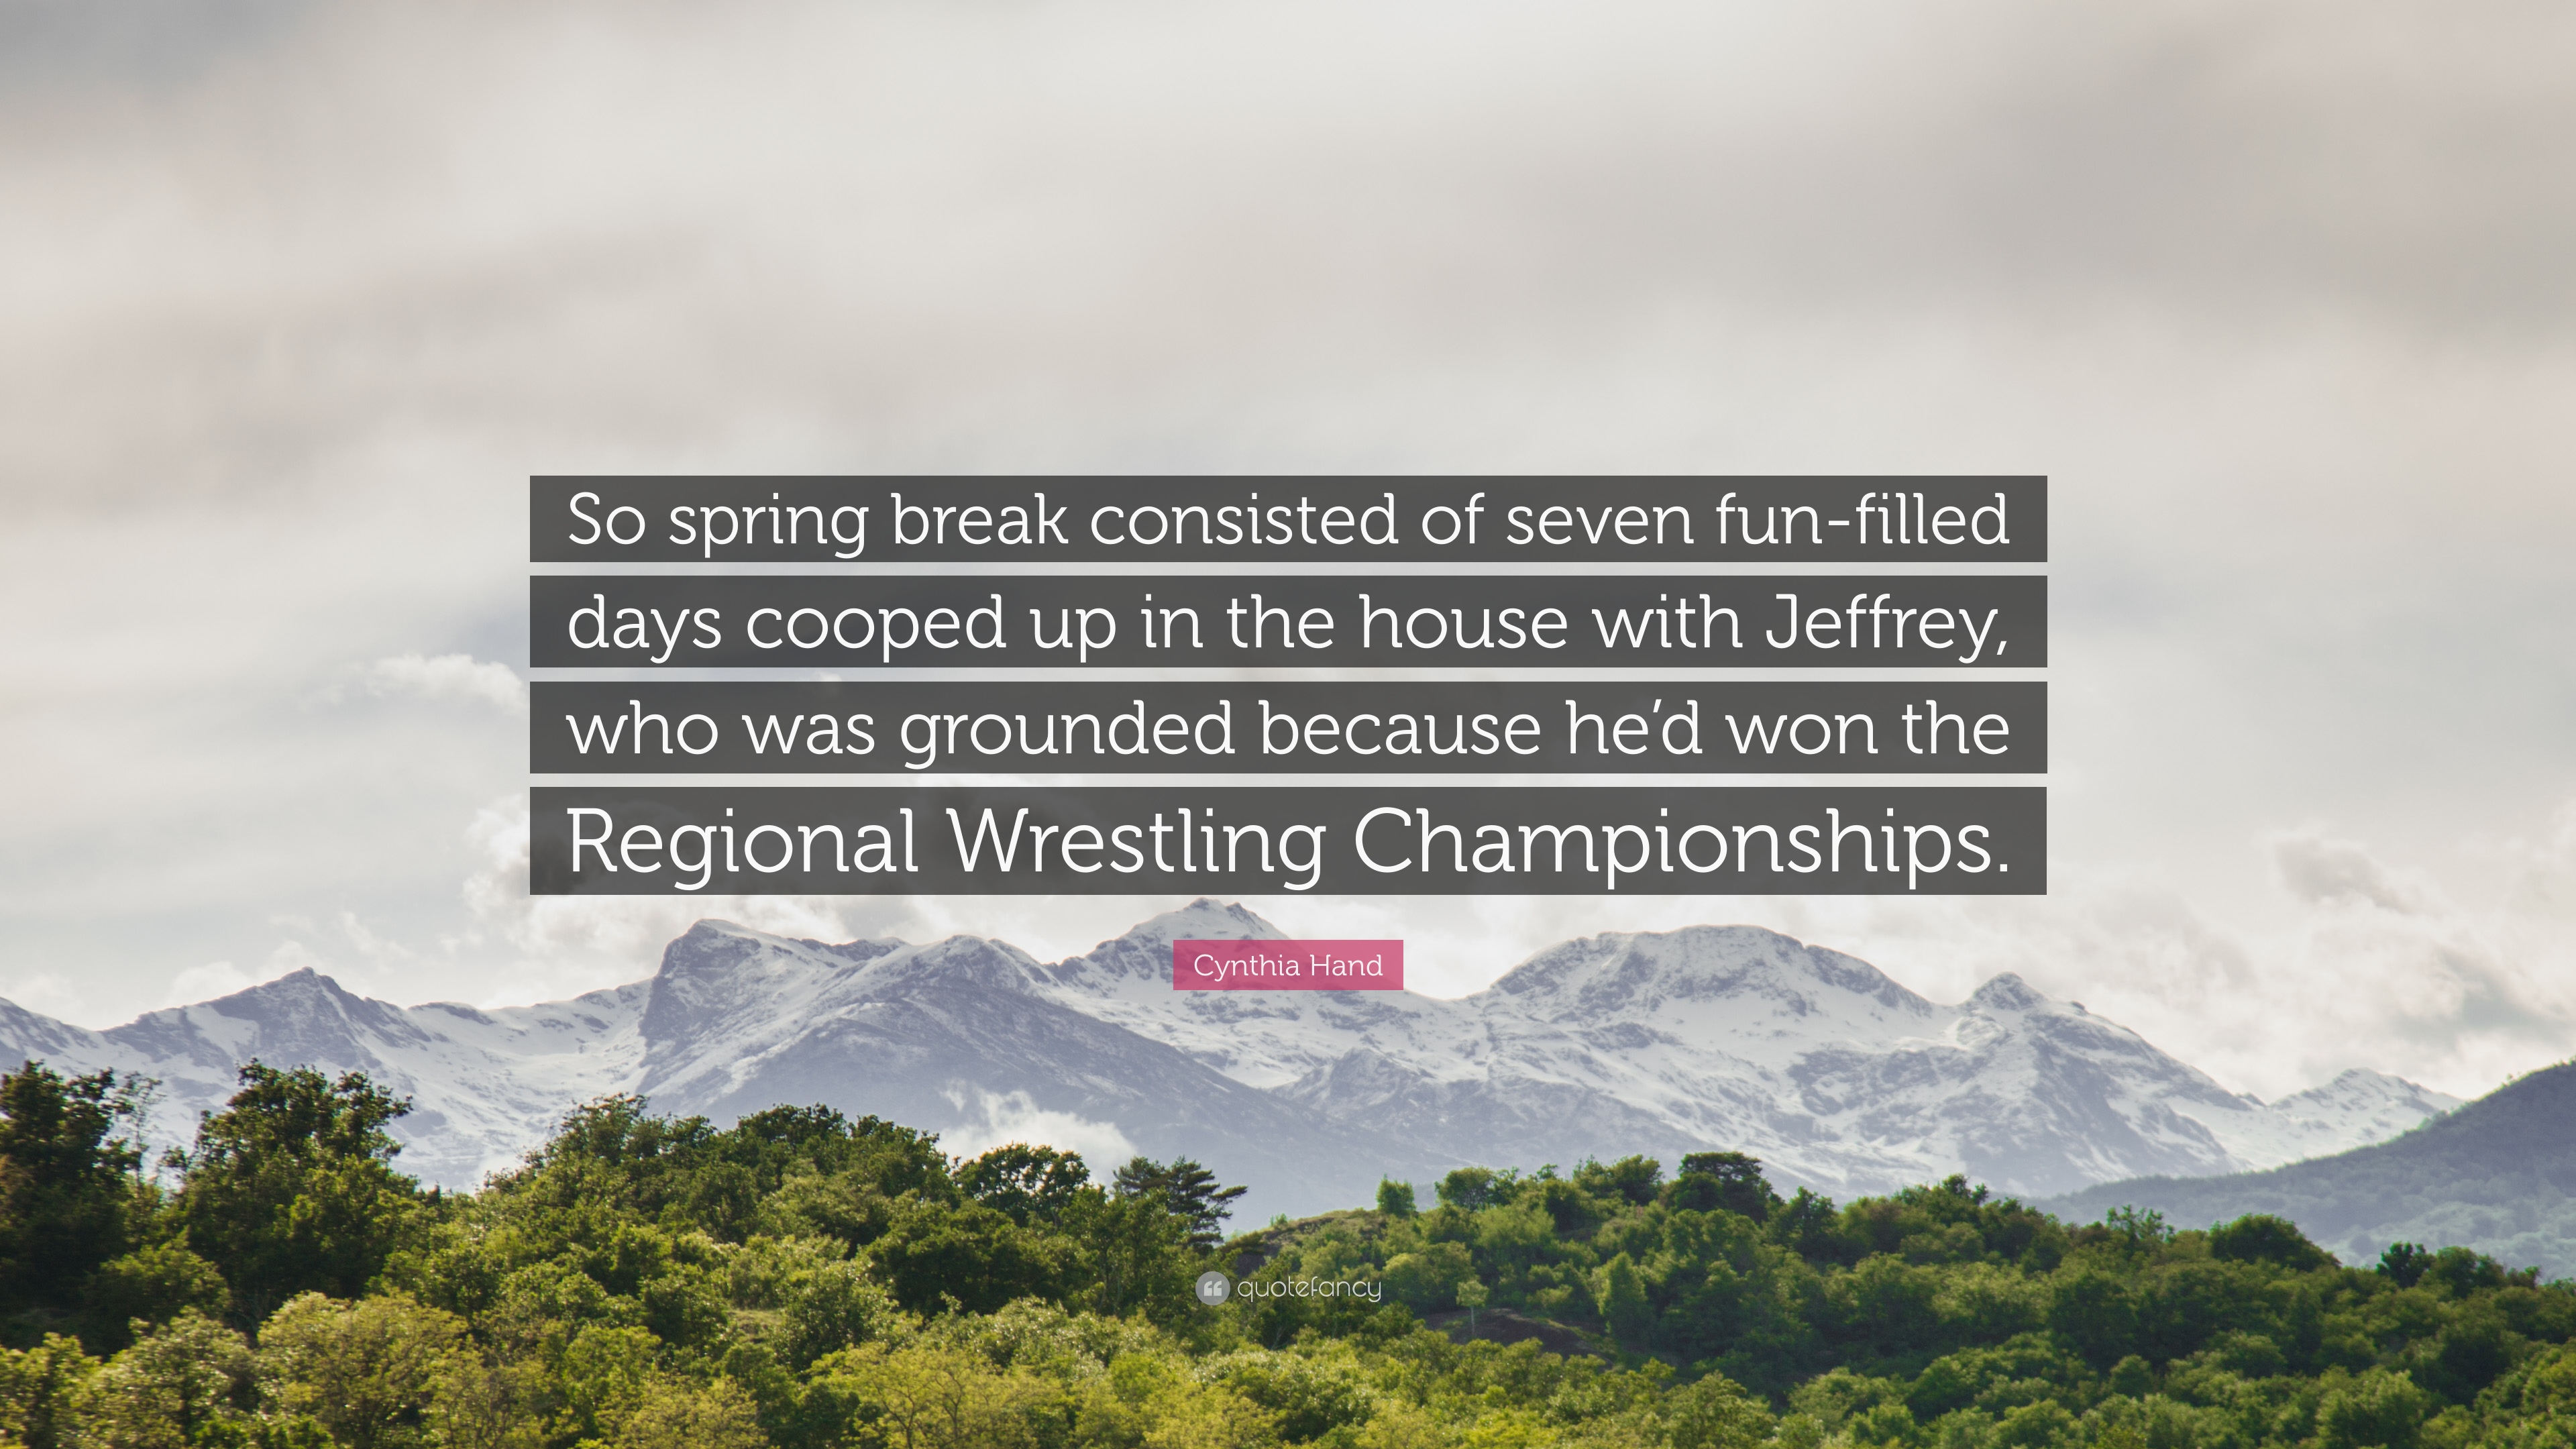 Cynthia Hand Quote: “So spring break consisted of seven fun